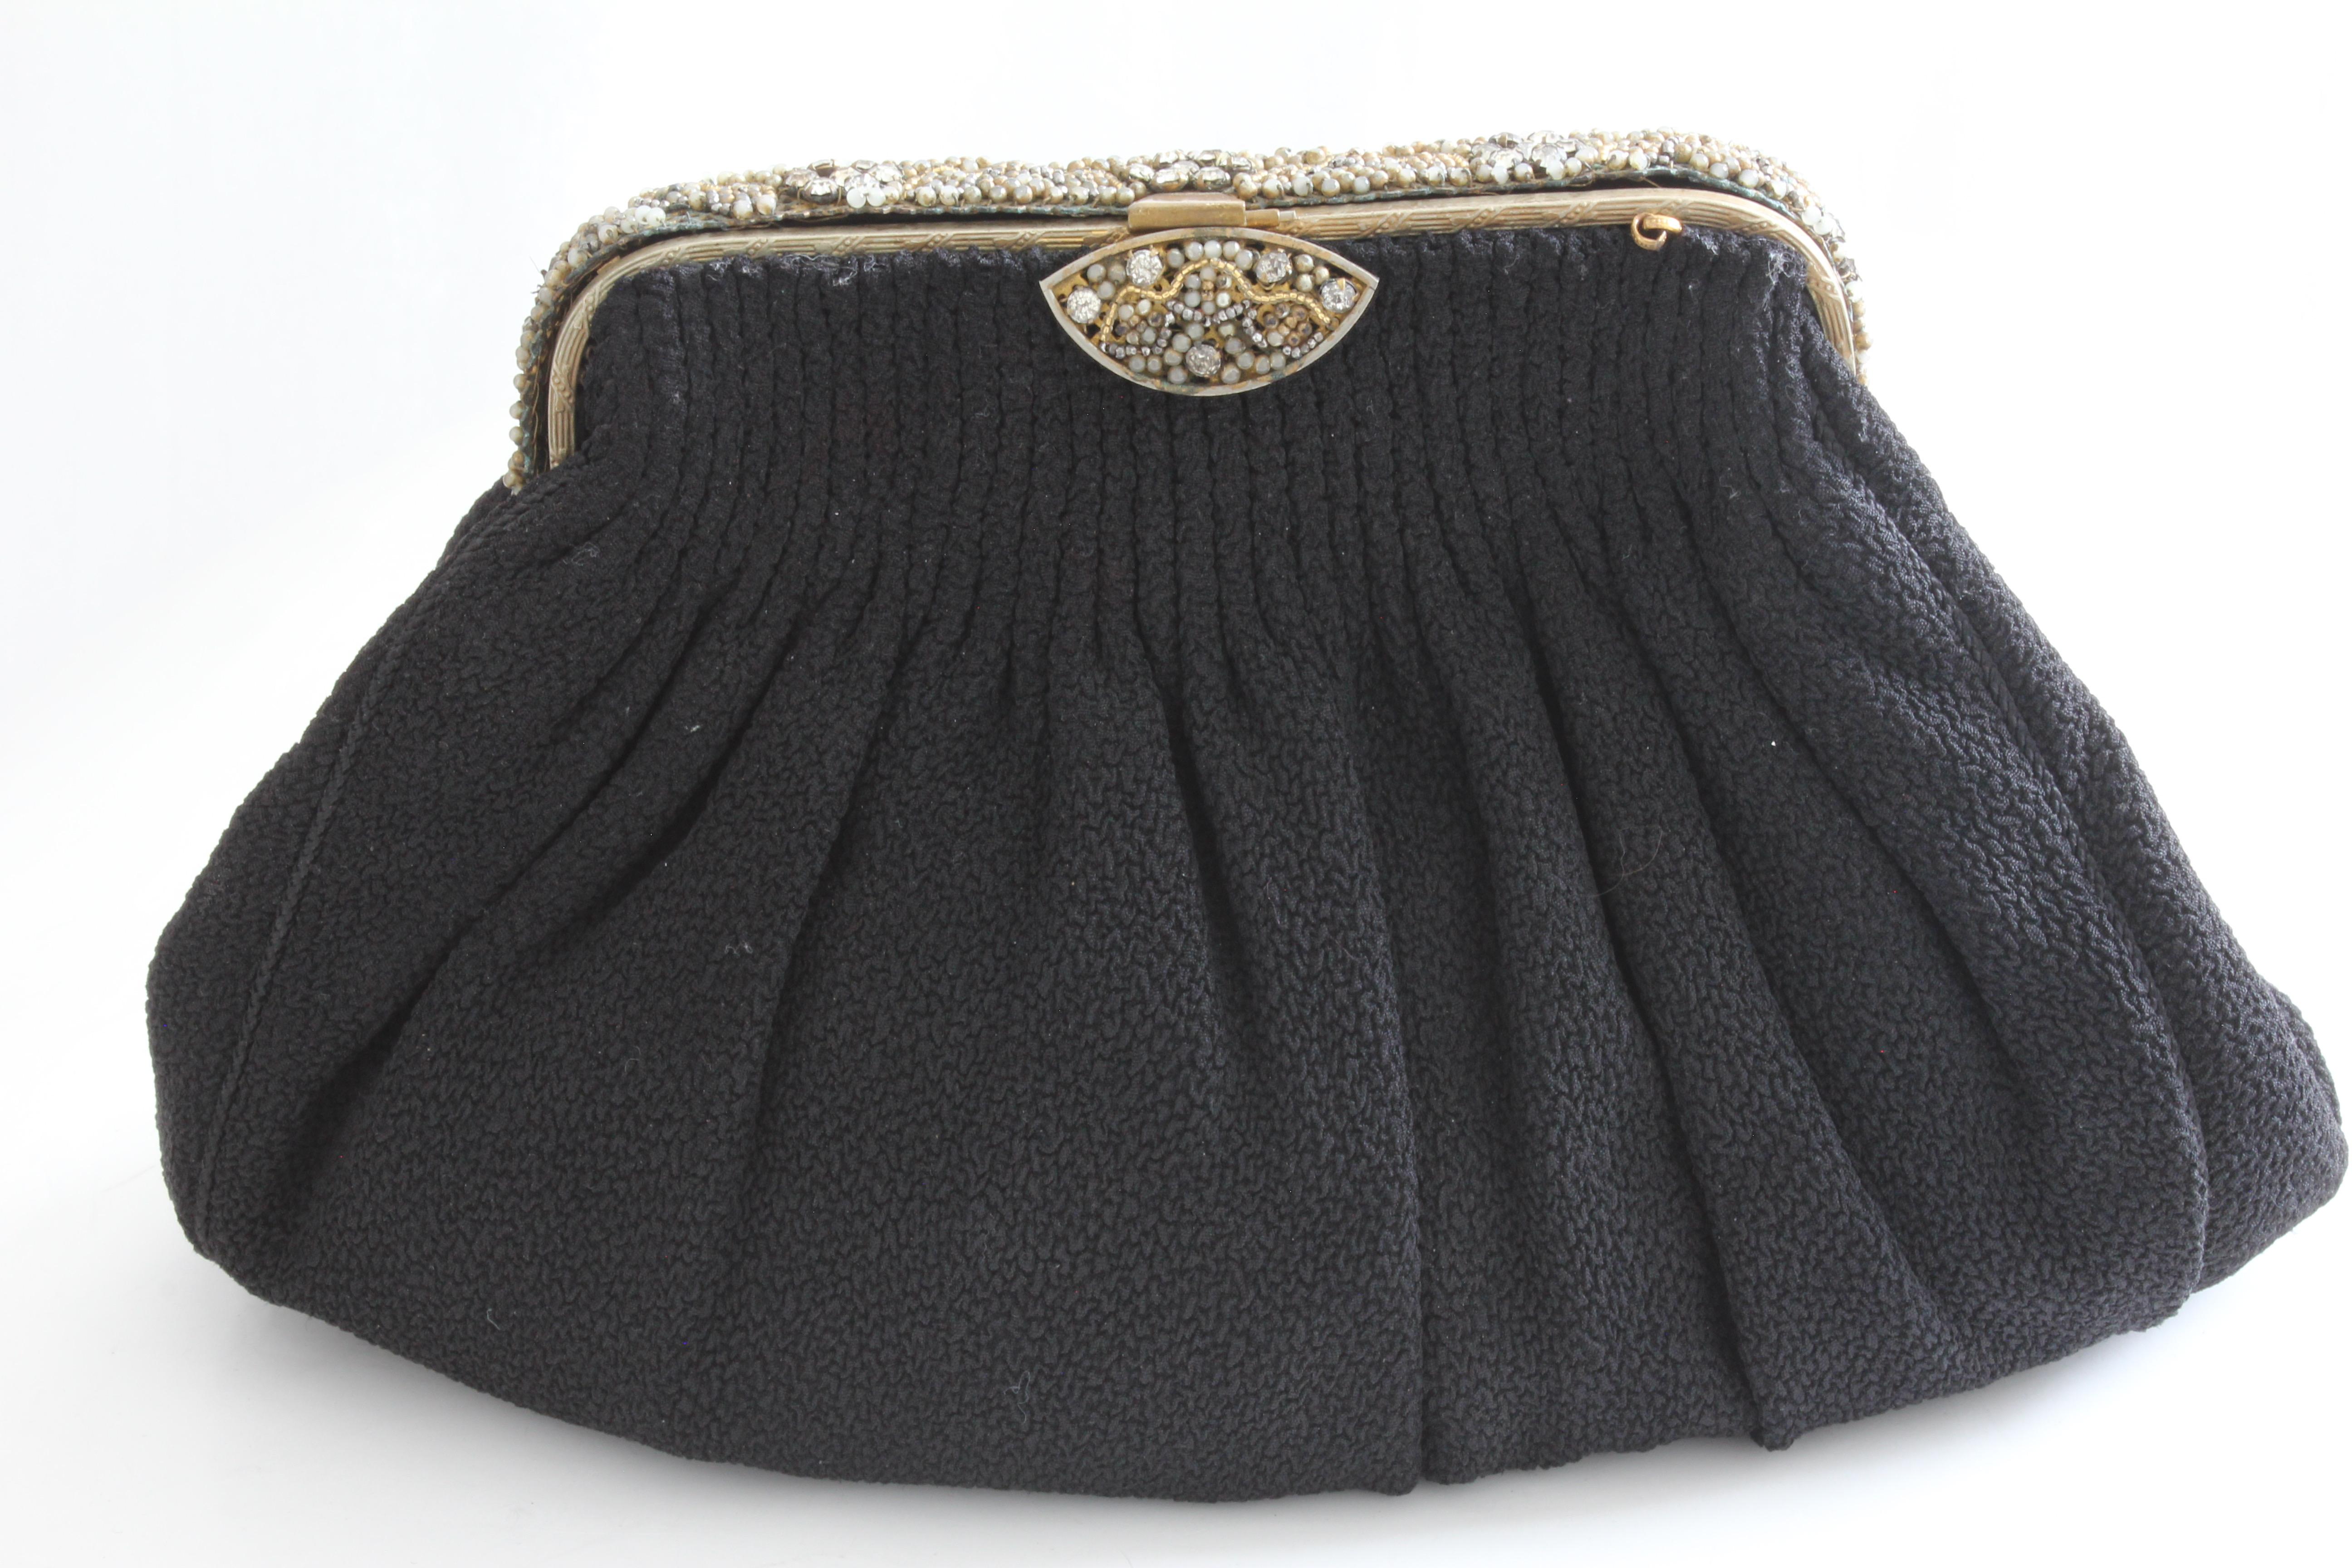 This lovely little bag was made by Custom Bags by Christine, Detroit, most likely in the 1940s.  Made from a nubby black fabric, it features corded seams, a pleated top and a decorative, hinged metal frame with closure clasp.  The interior is lined